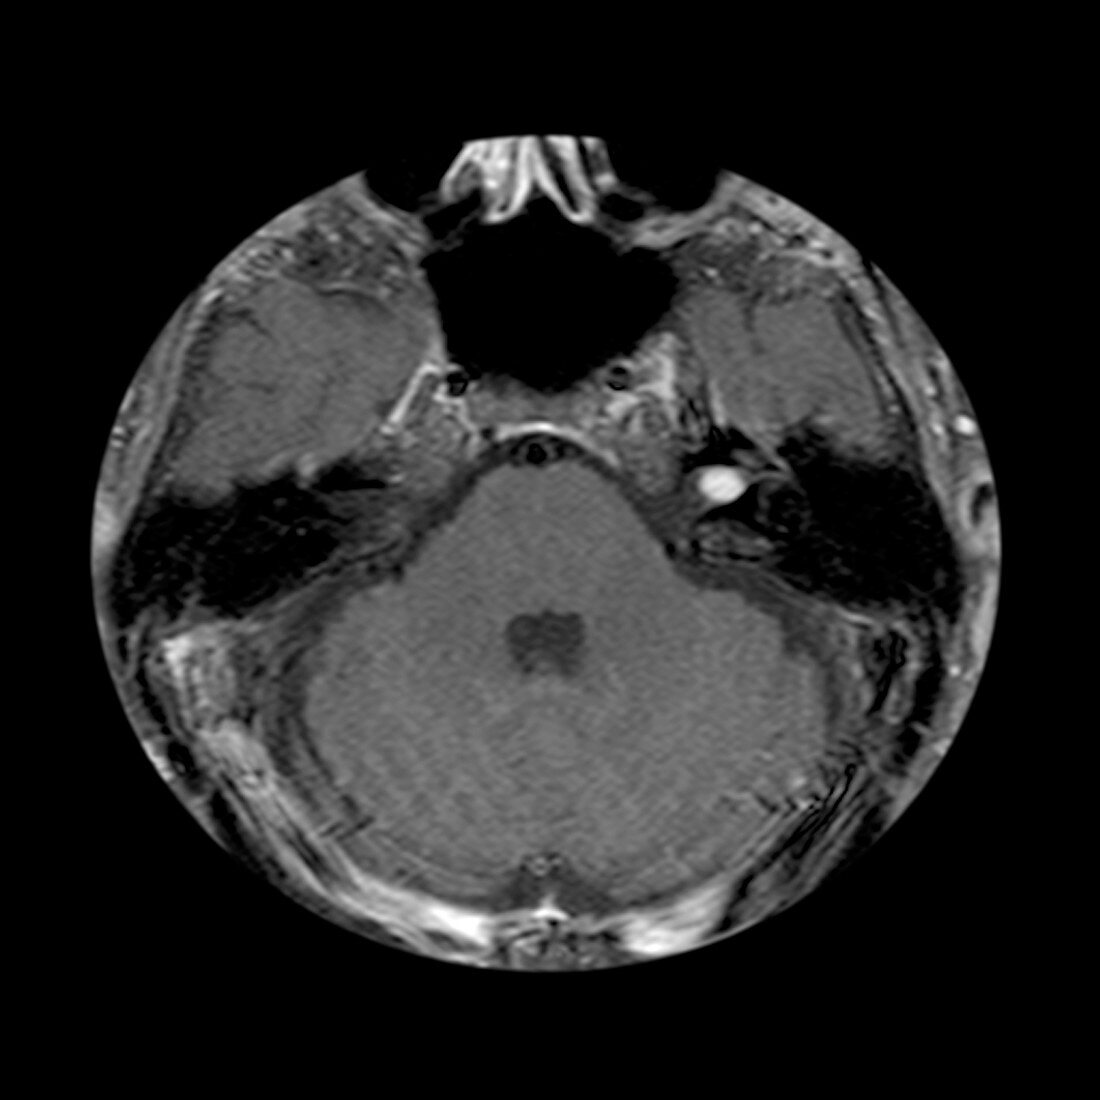 MRI of Acoustic Neuroma